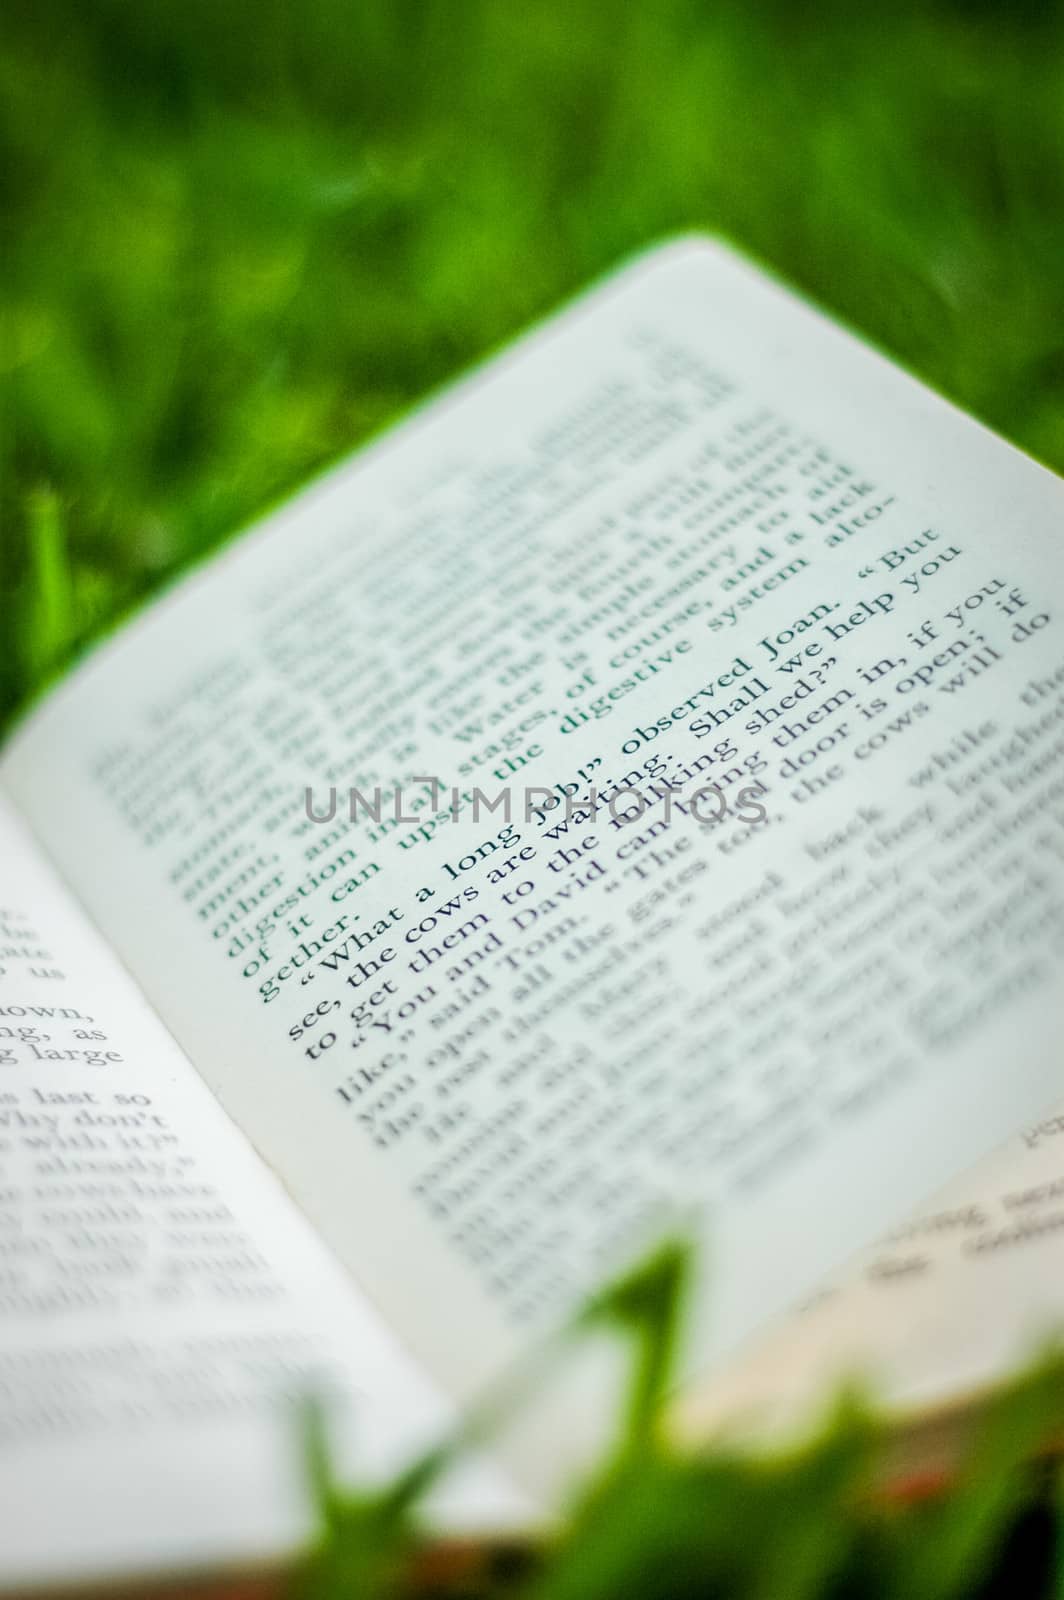 Recreation Image Of A Book On The Grass (with shallow focus)